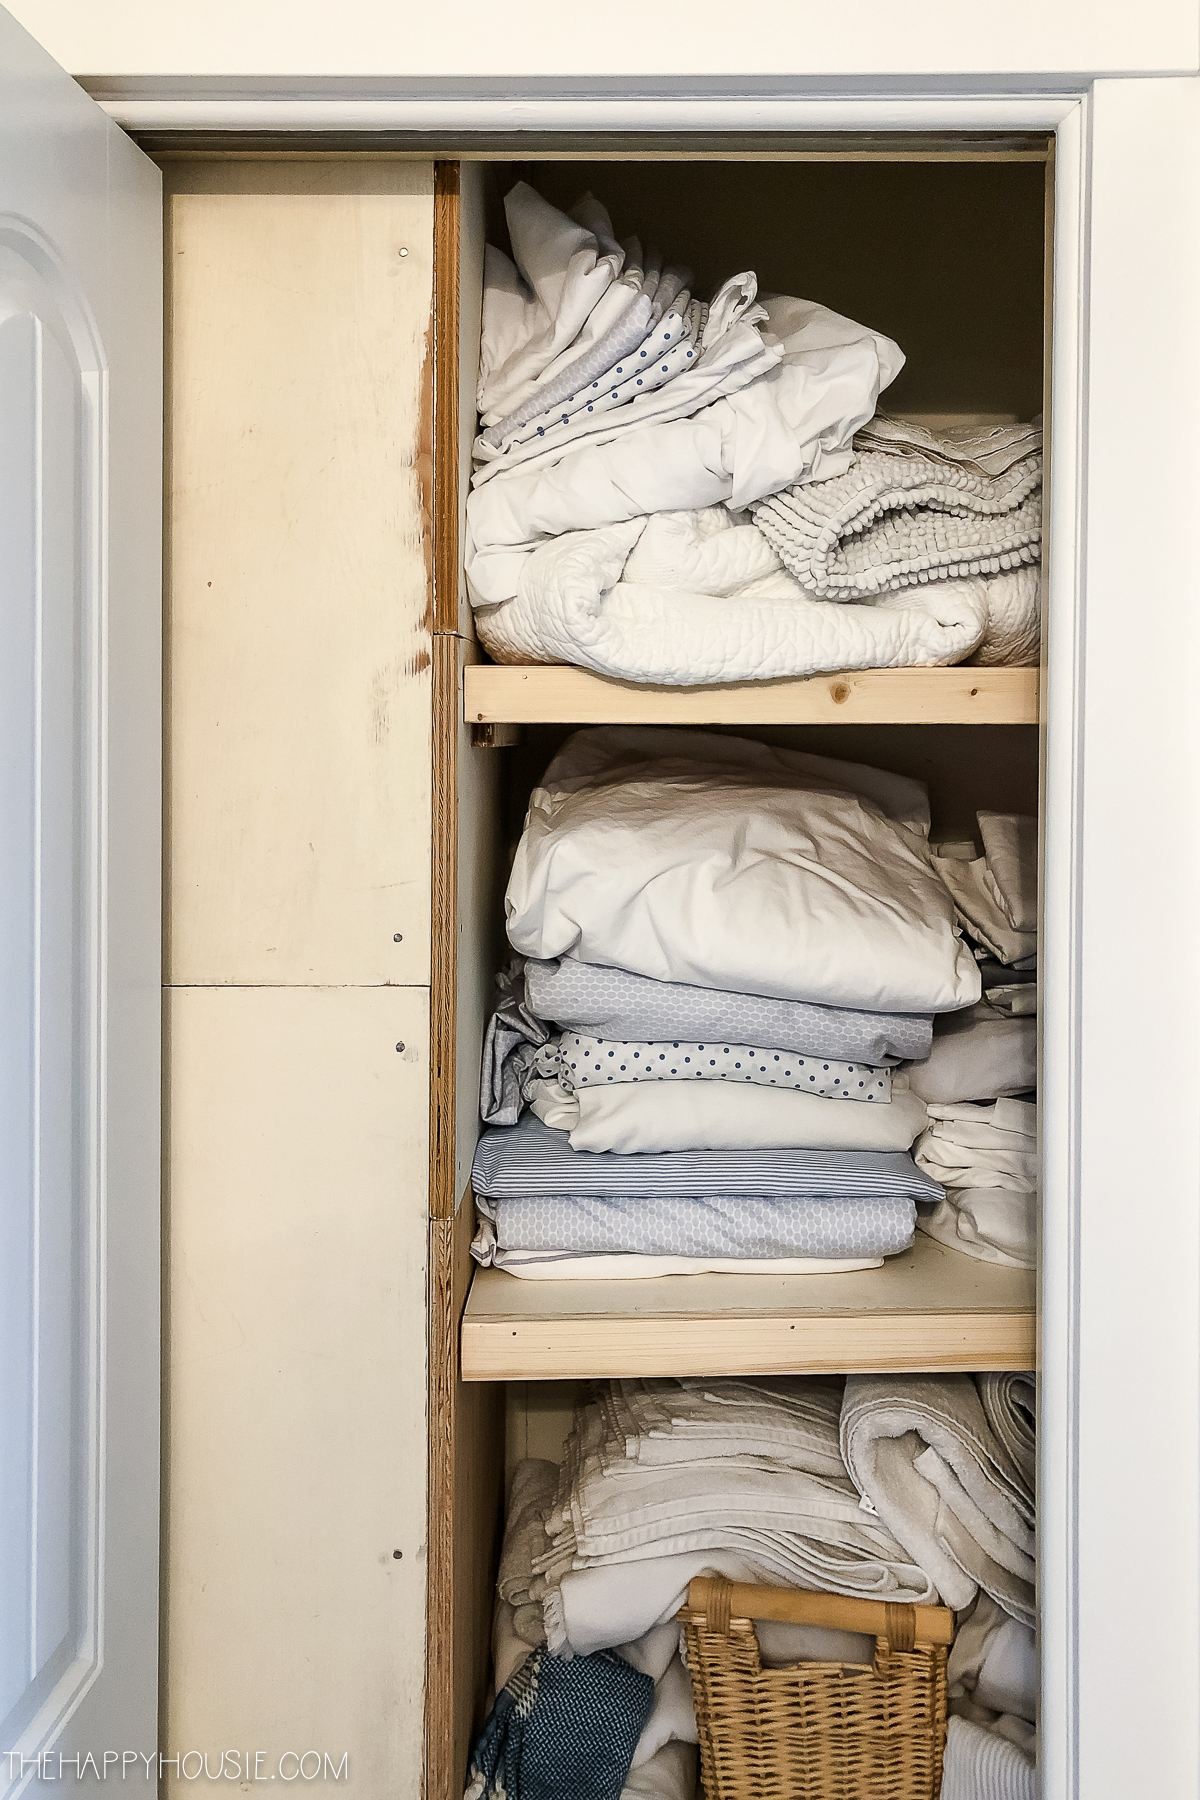 Sheets and towels in the linen closet.